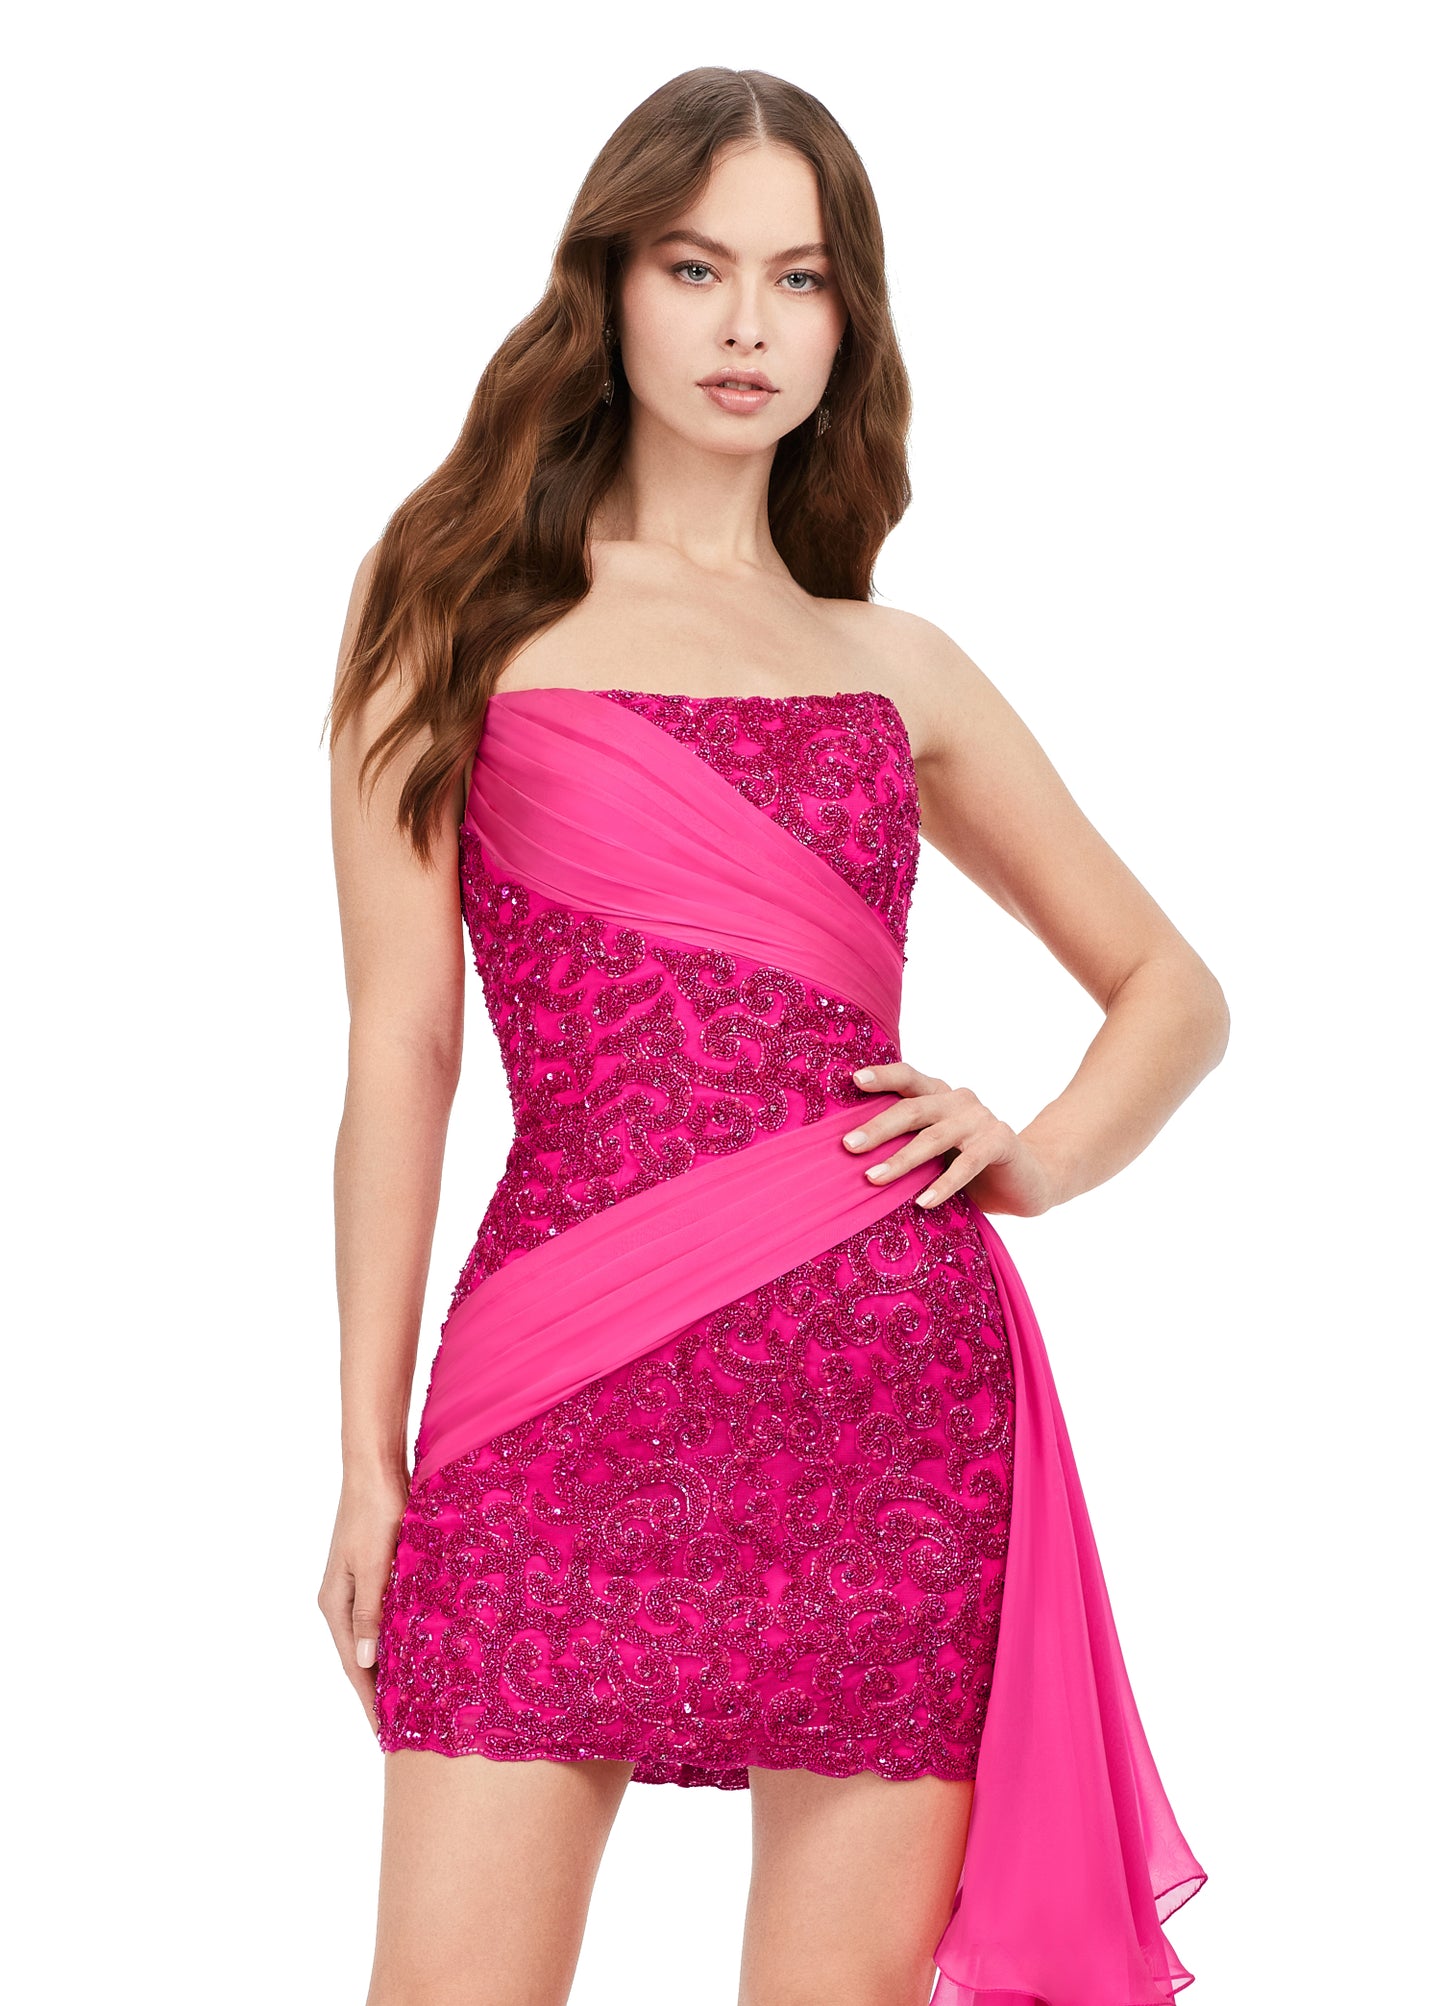 Ashley Lauren 11392 Chiffon Side Overskirt Fully Beaded Strapless Cocktail Homecoming Dress. Stay FABULOUS in this fully beaded cocktail dress. This look is complete with chiffon wrapped details that give way to a flowing chiffon side skirt.